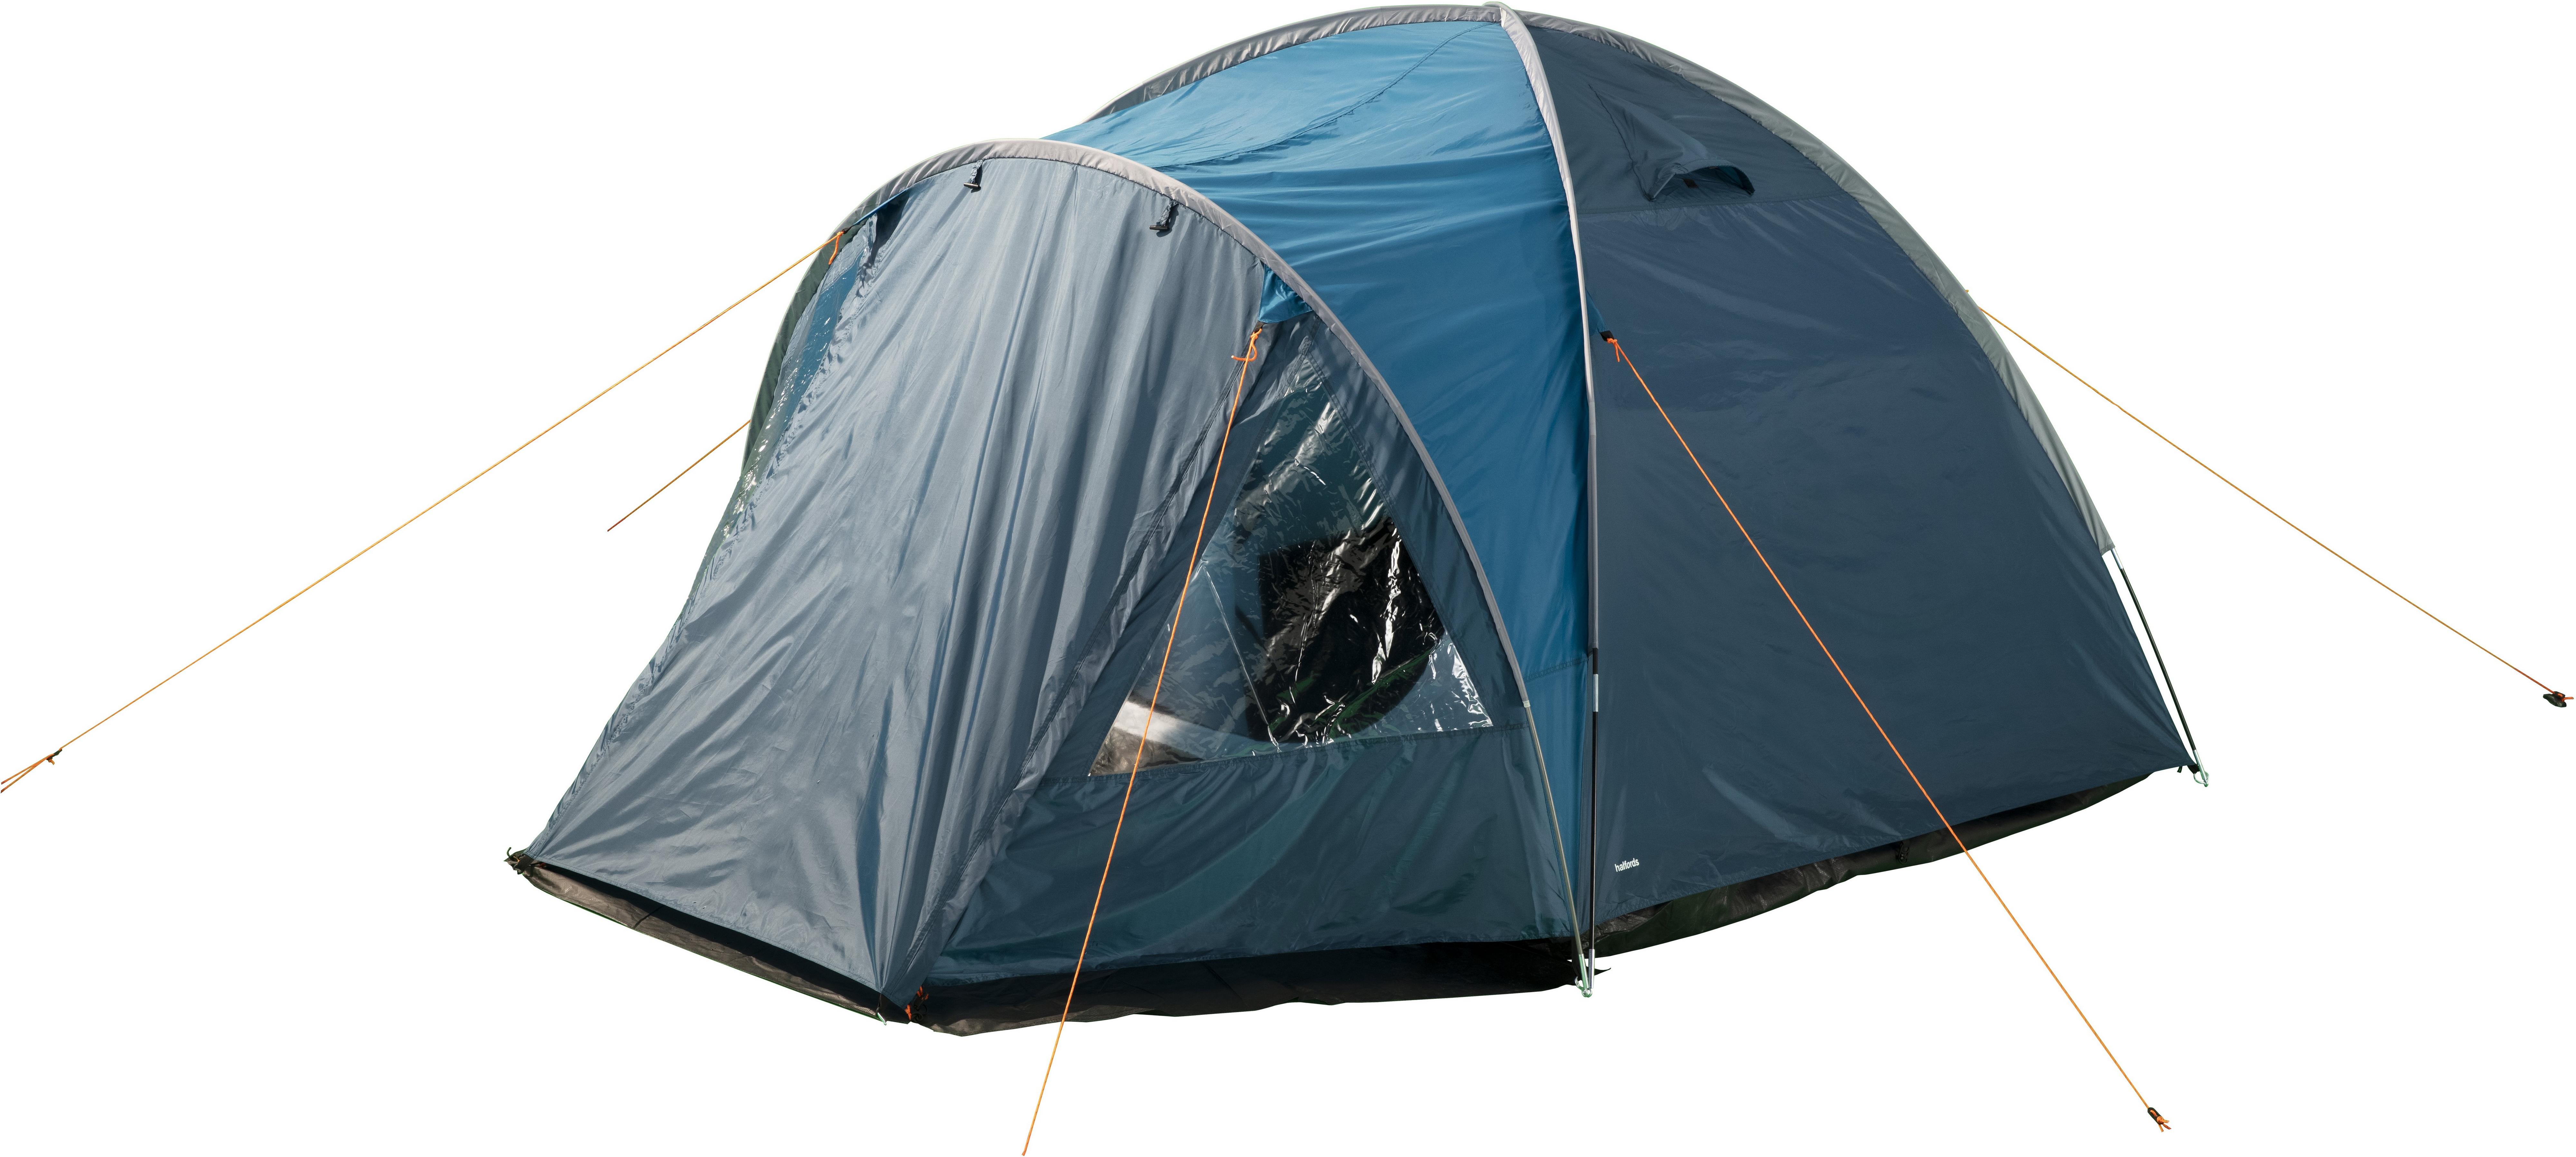 Halfords 4 Person Double Skin Tent